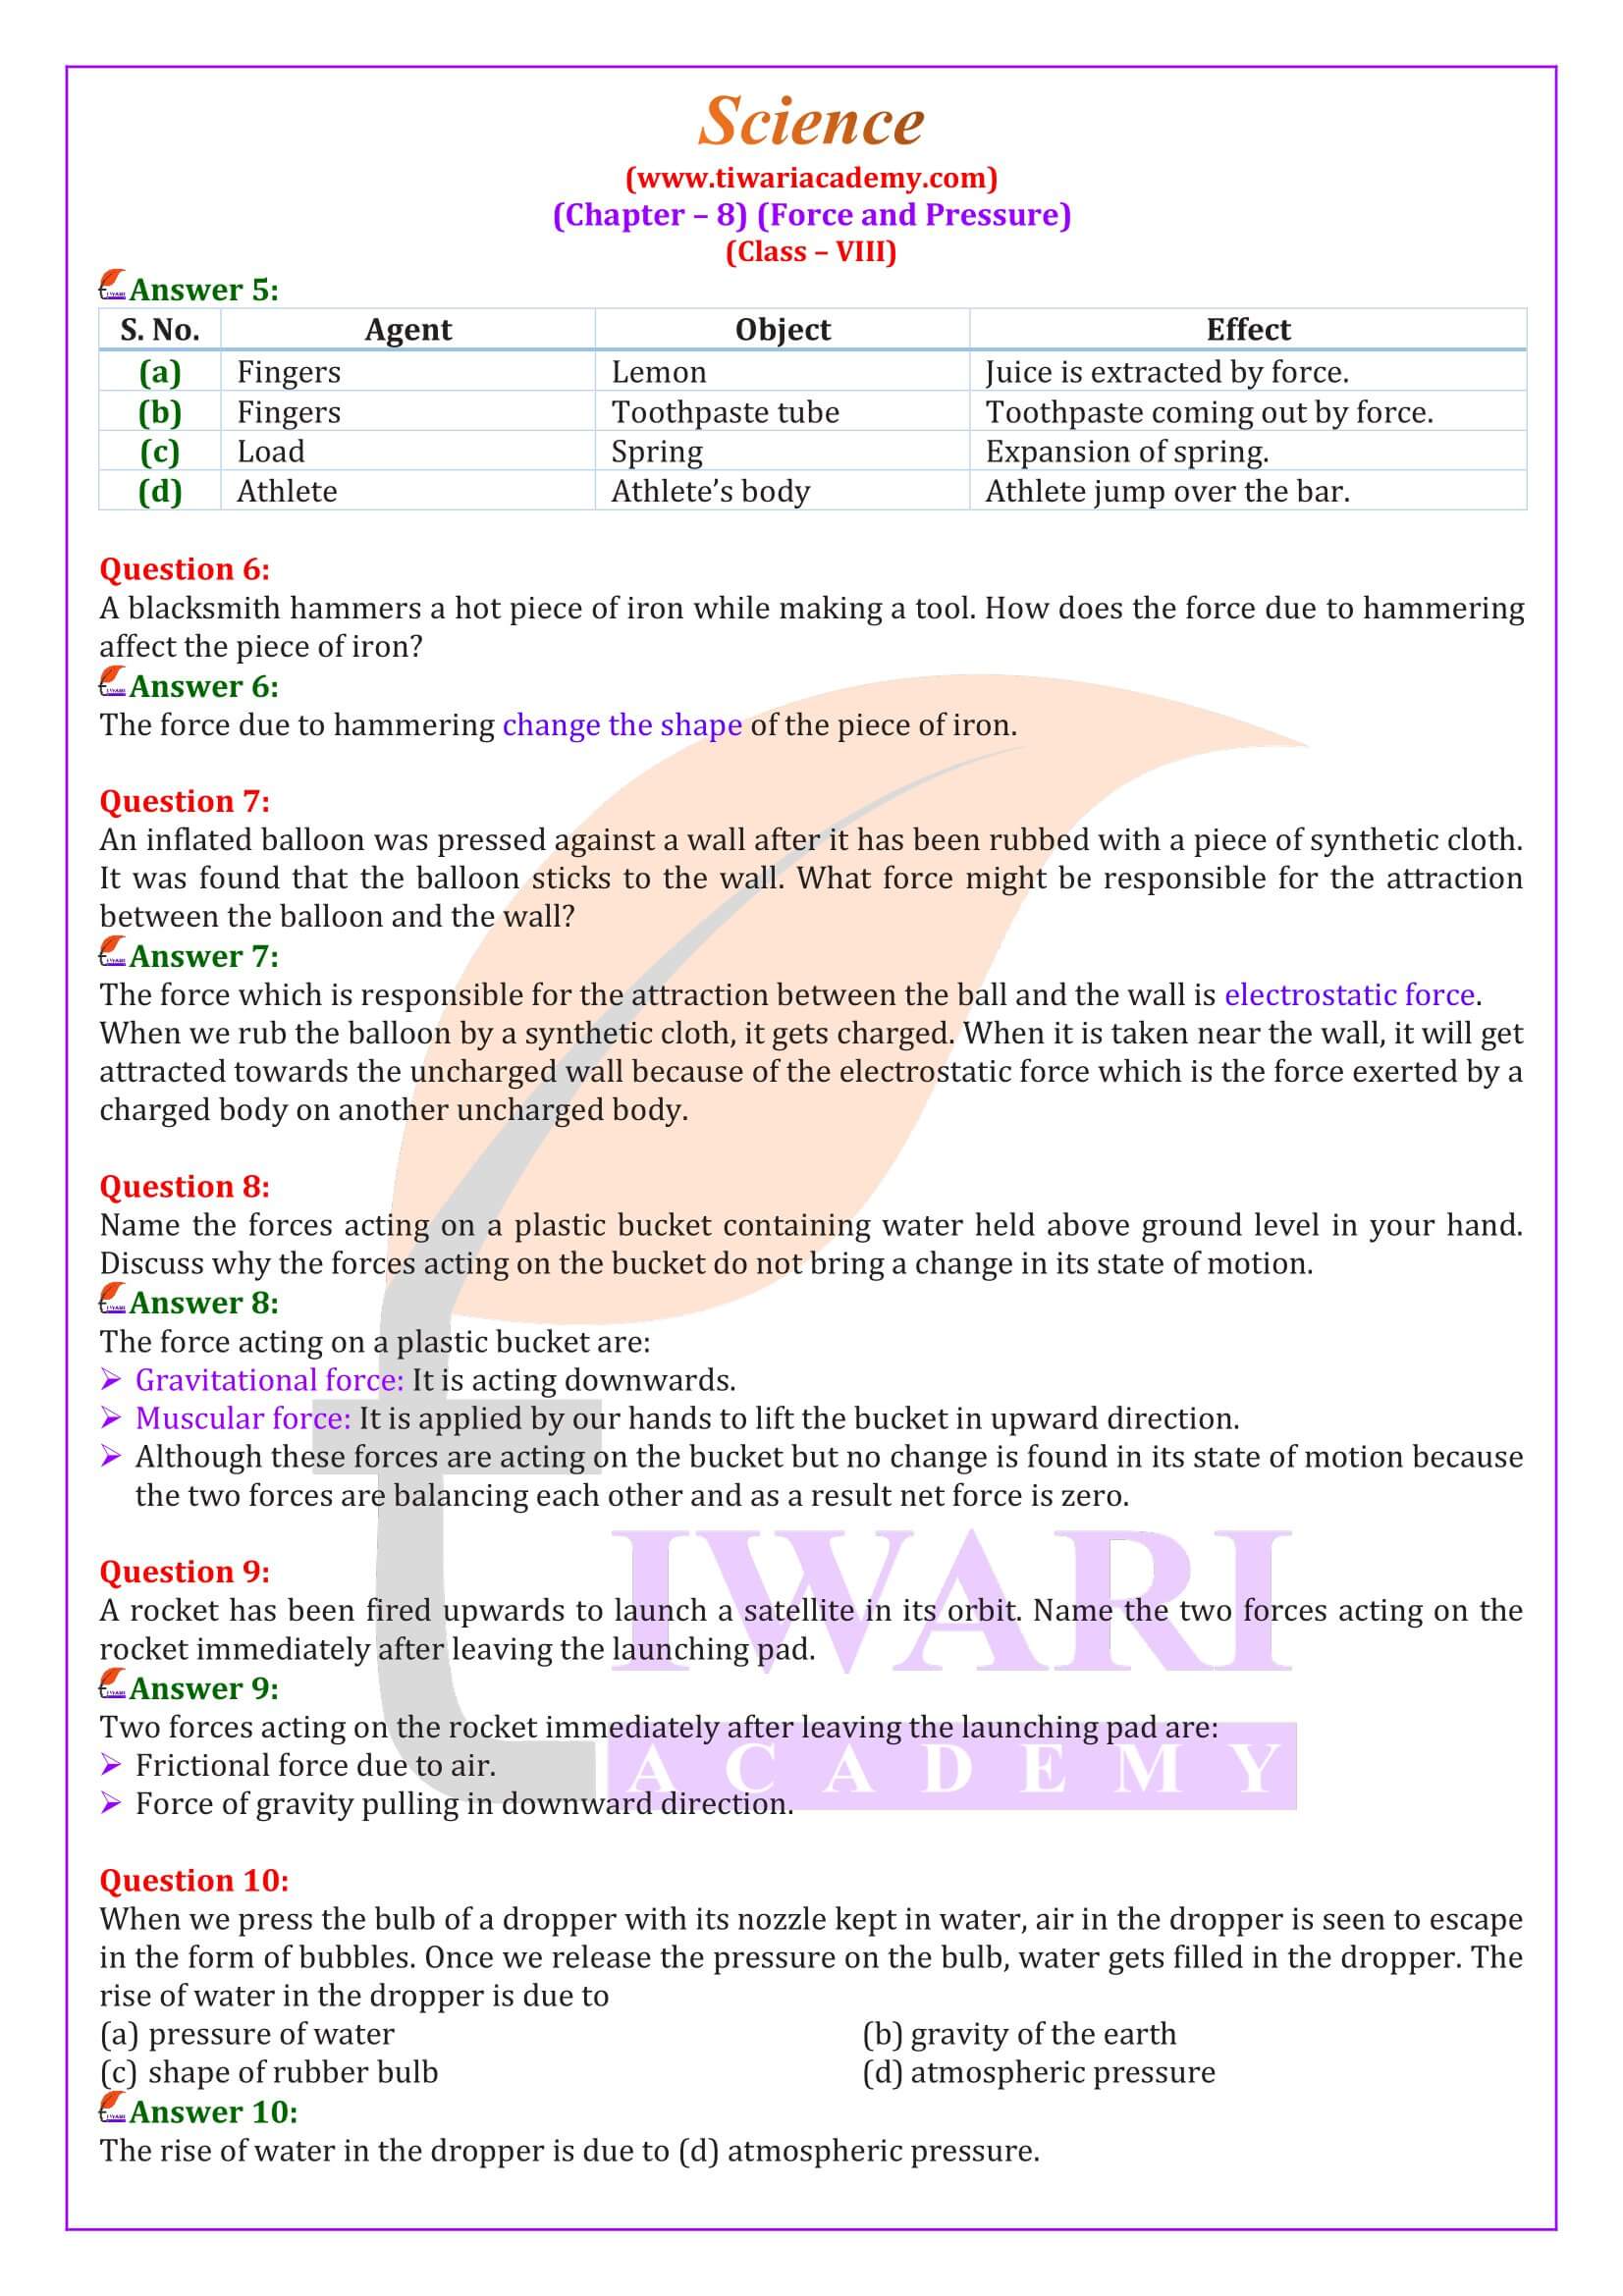 NCERT Solutions for Class 8 Science Chapter 8 in English Medium